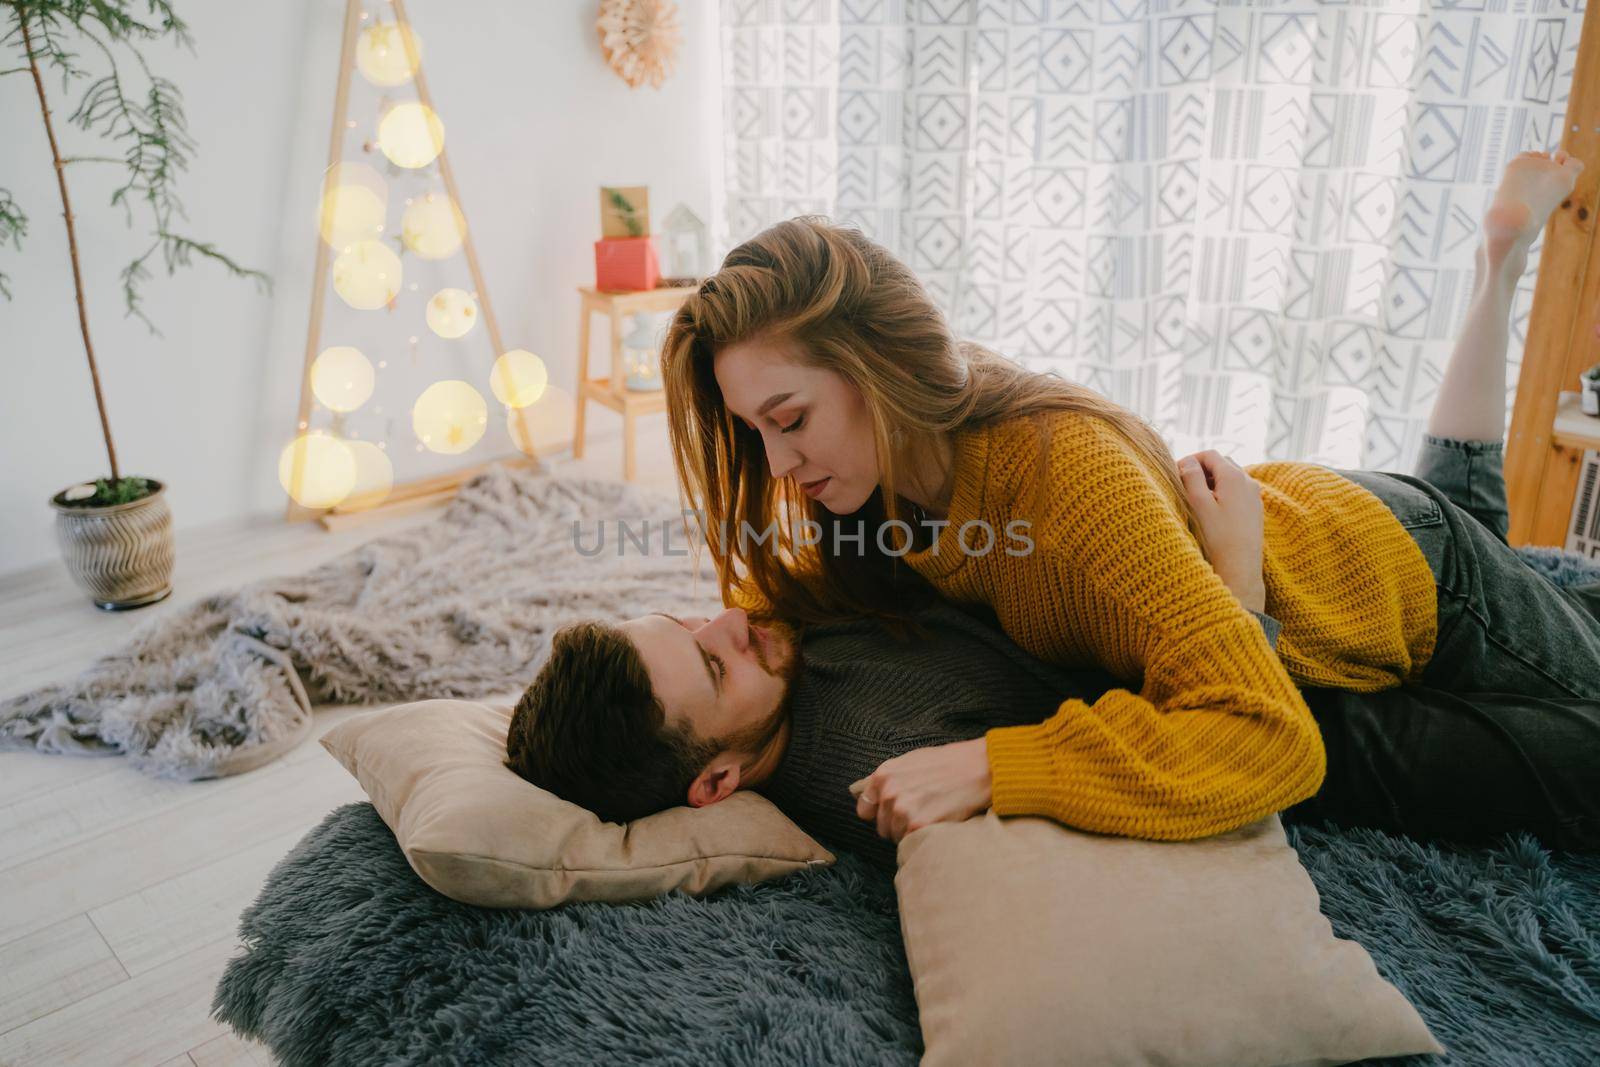 Beautiful couple in love lies on the bed against the background of Christmas decor. A live Christmas tree in a pot and a handmade Christmas tree made of natural wood. Christmas yellow garland.